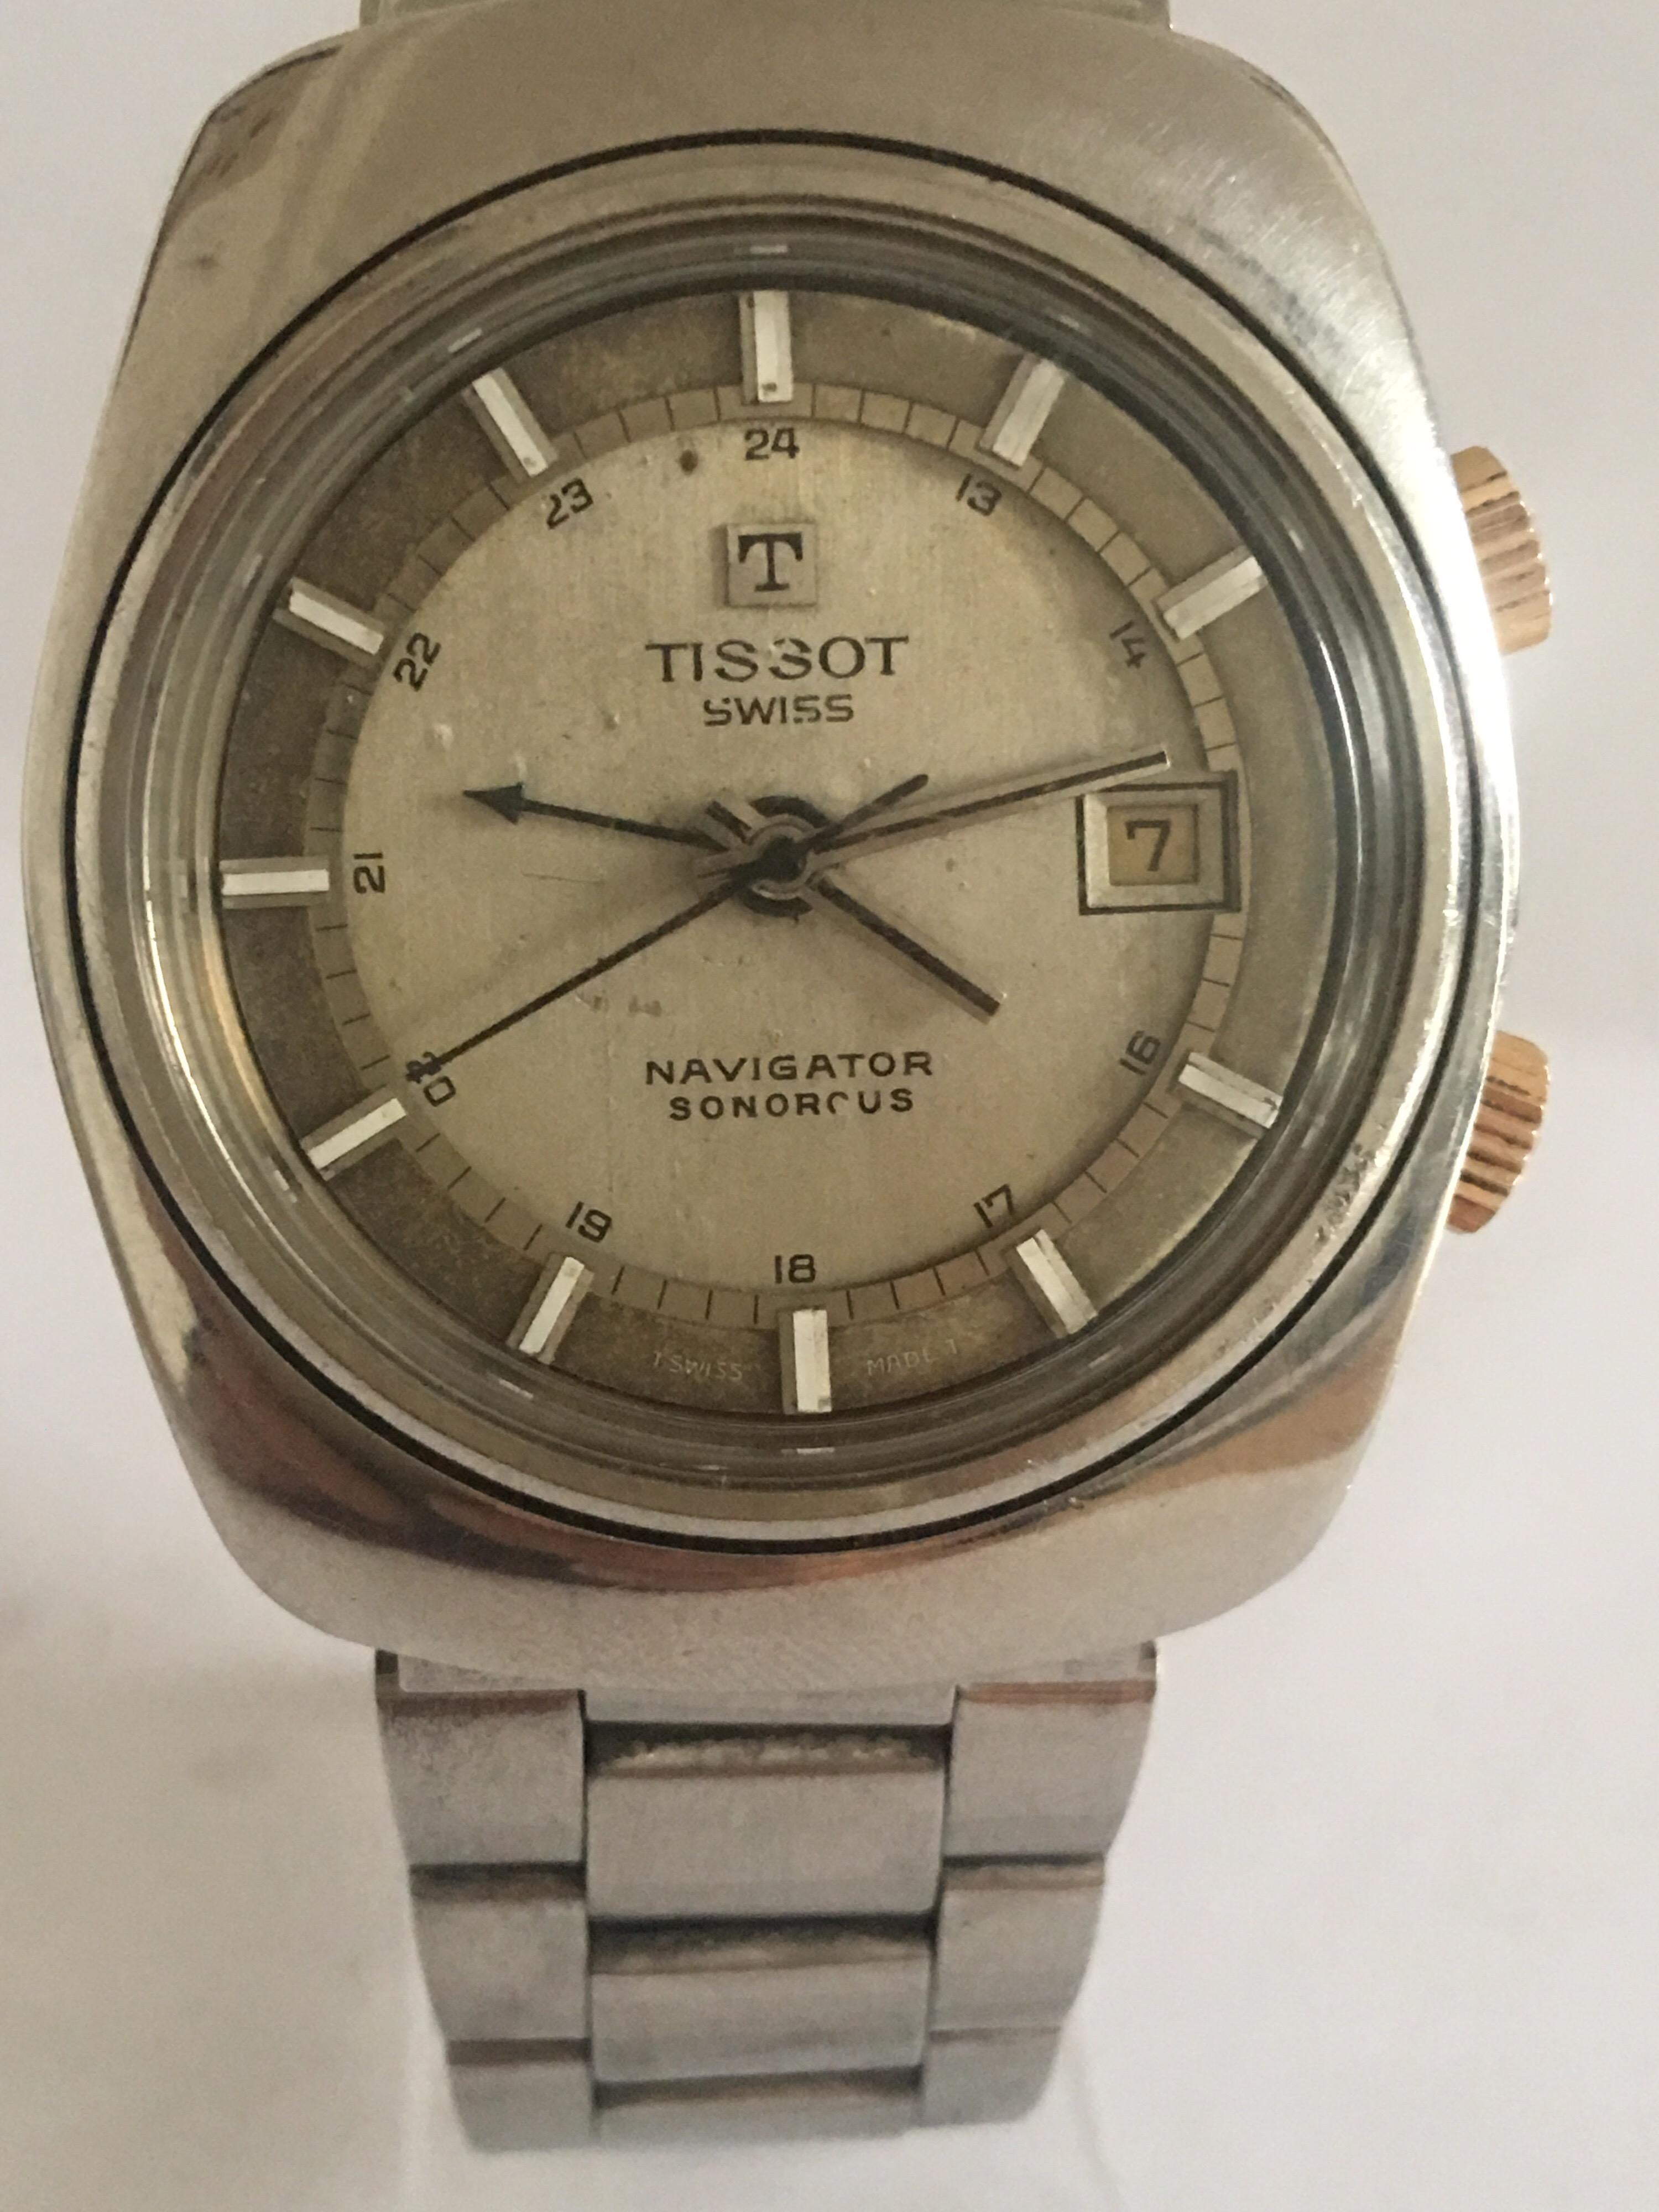 Vintage 1970s Stainless Steel Tissot Navigator Sonorous Alarm Wristwatch  For Sale 6